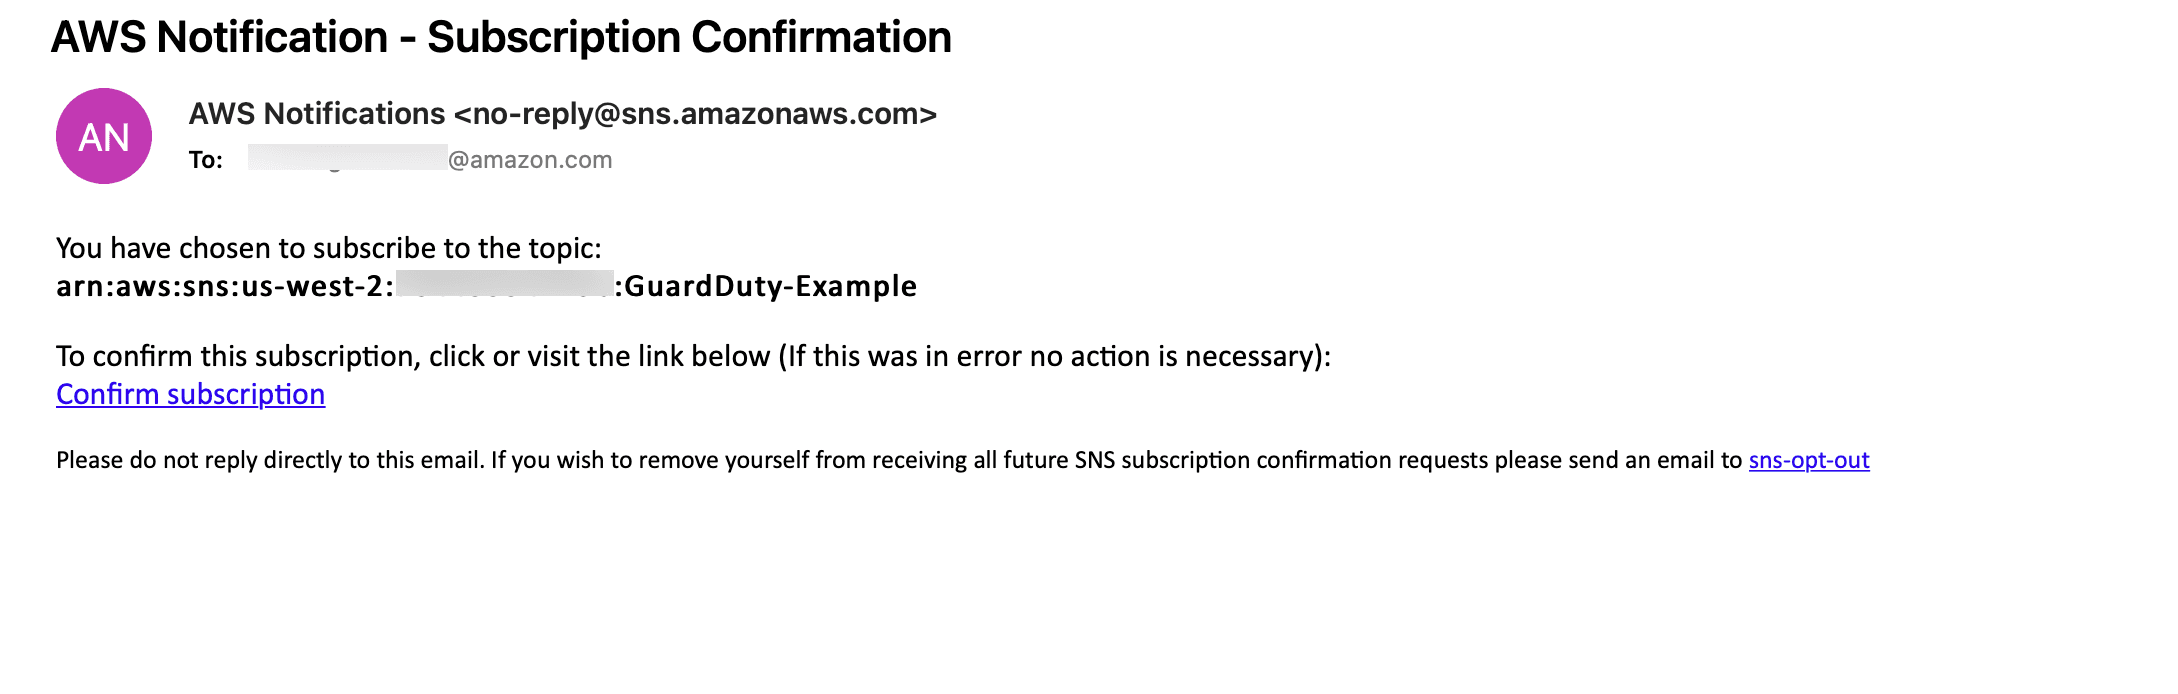 Email of Subscription Confirmation